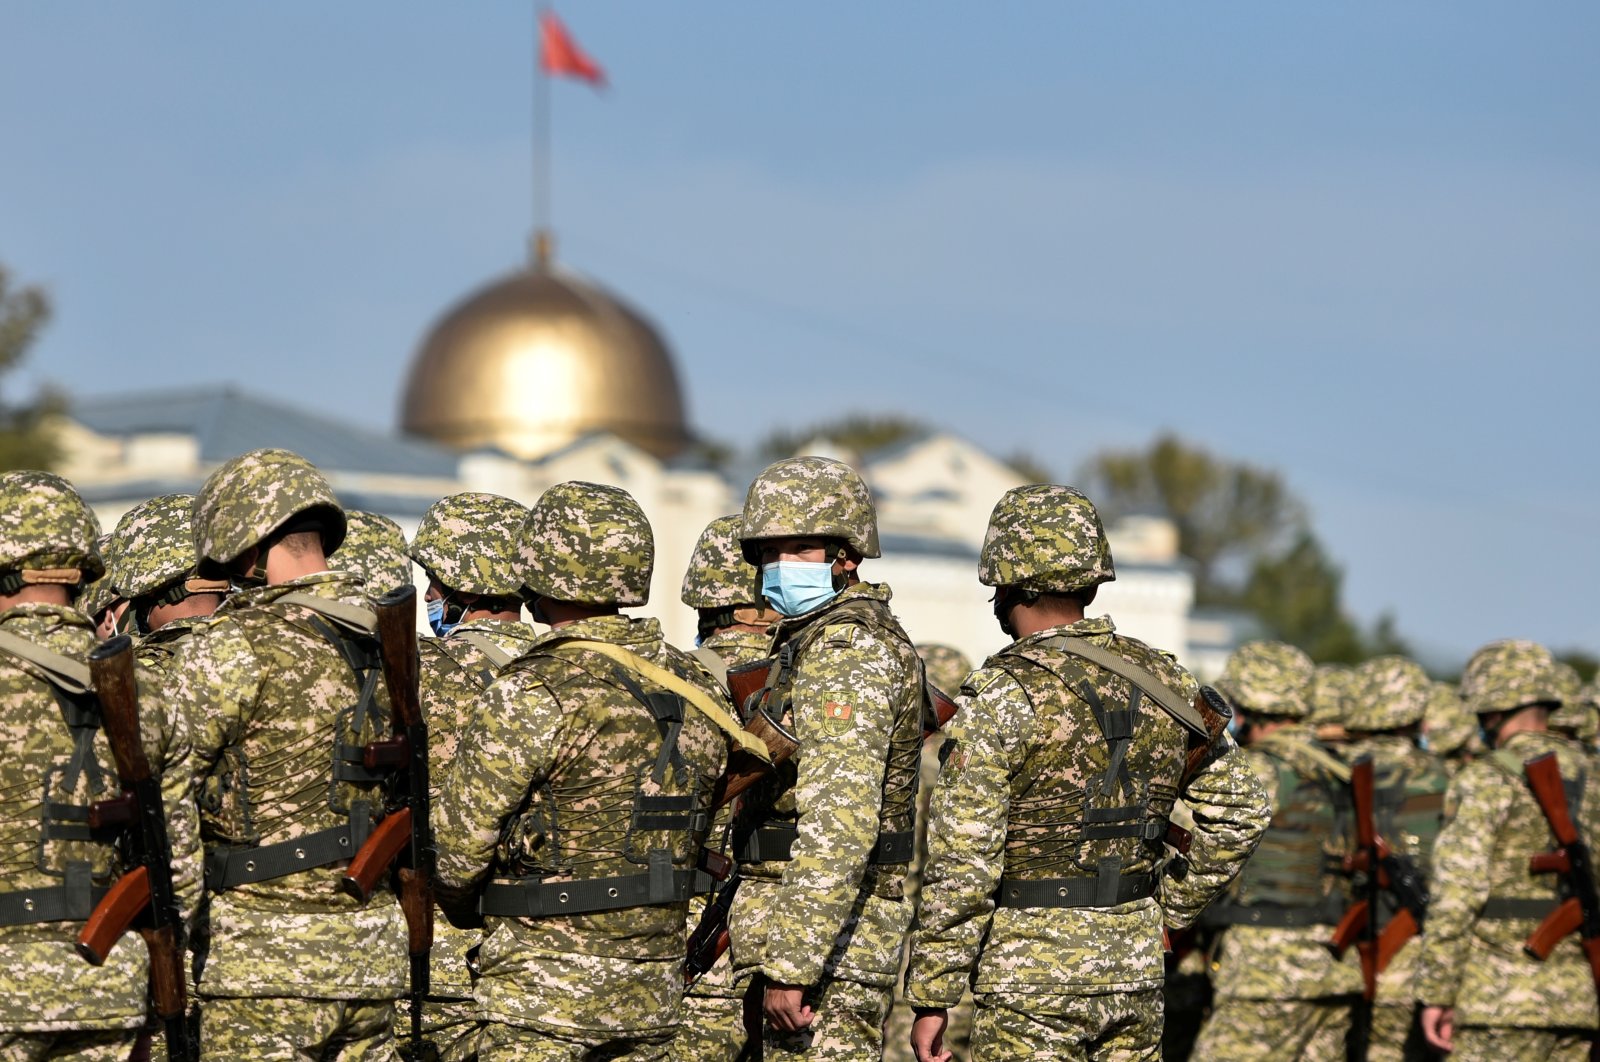 Members of Kyrgyz armed forces line up in Ala-Too Square after President Sooronbai Jeenbekov declared a state of emergency in the capital and ordered troops to be deployed there, in Bishkek, Kyrgyzstan Oct. 10, 2020. (Reuters Photo)